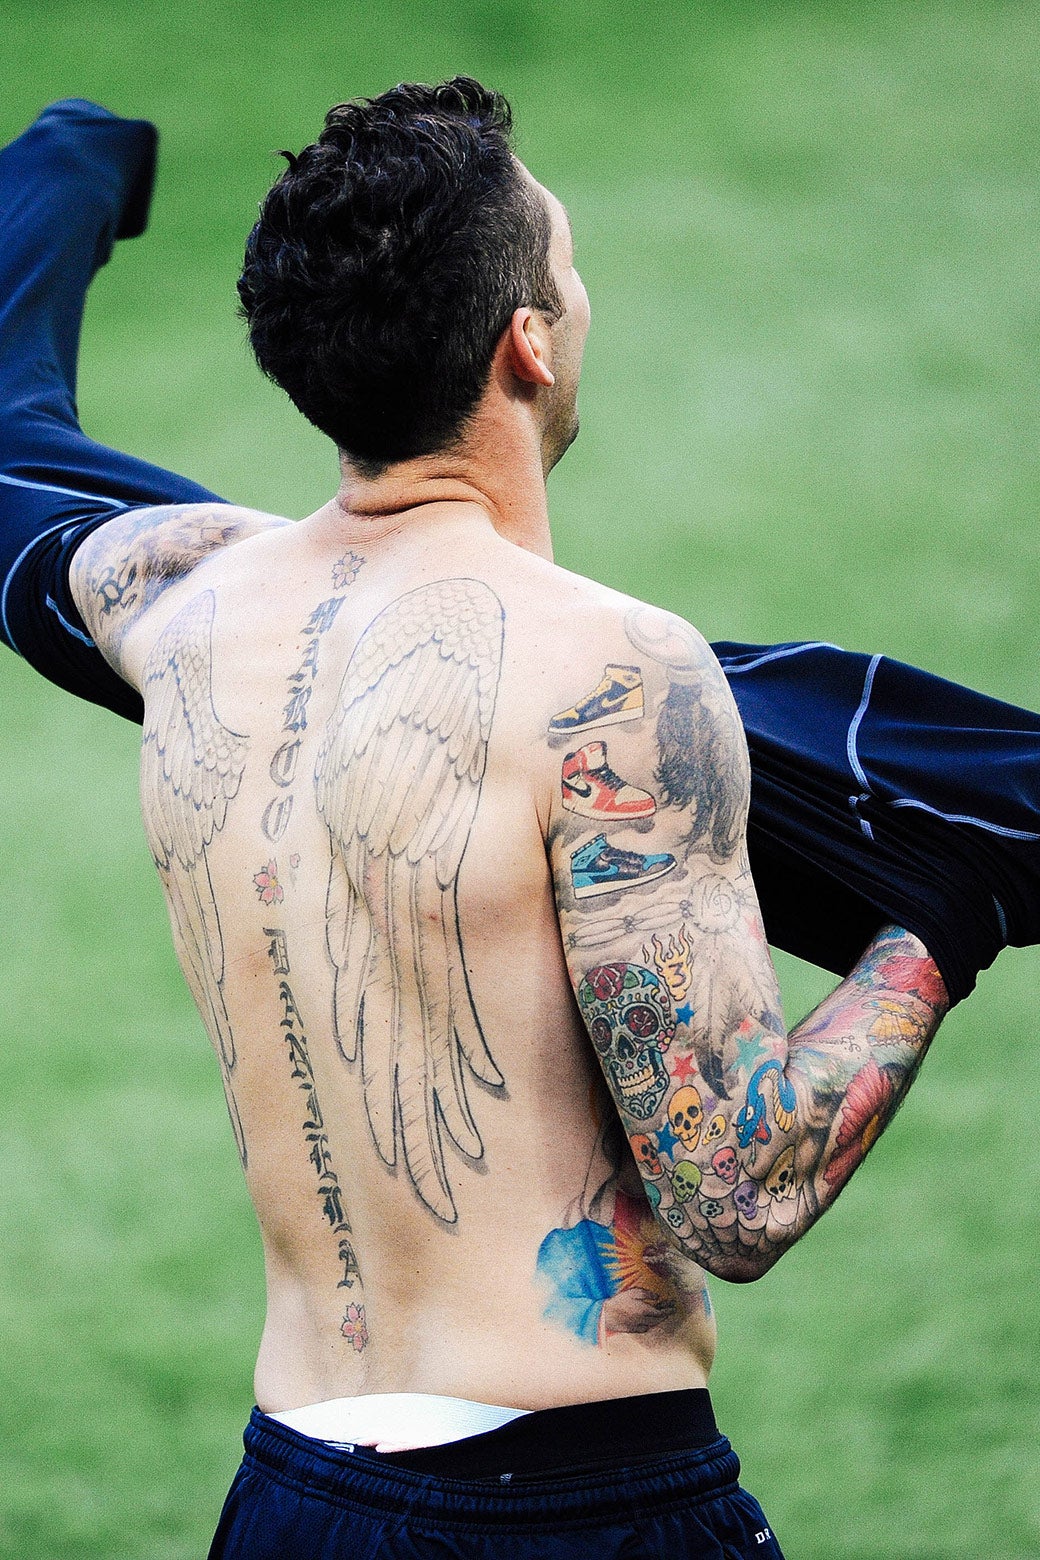 Angel wings are seen tattooed on Marco Materazzi’s back.